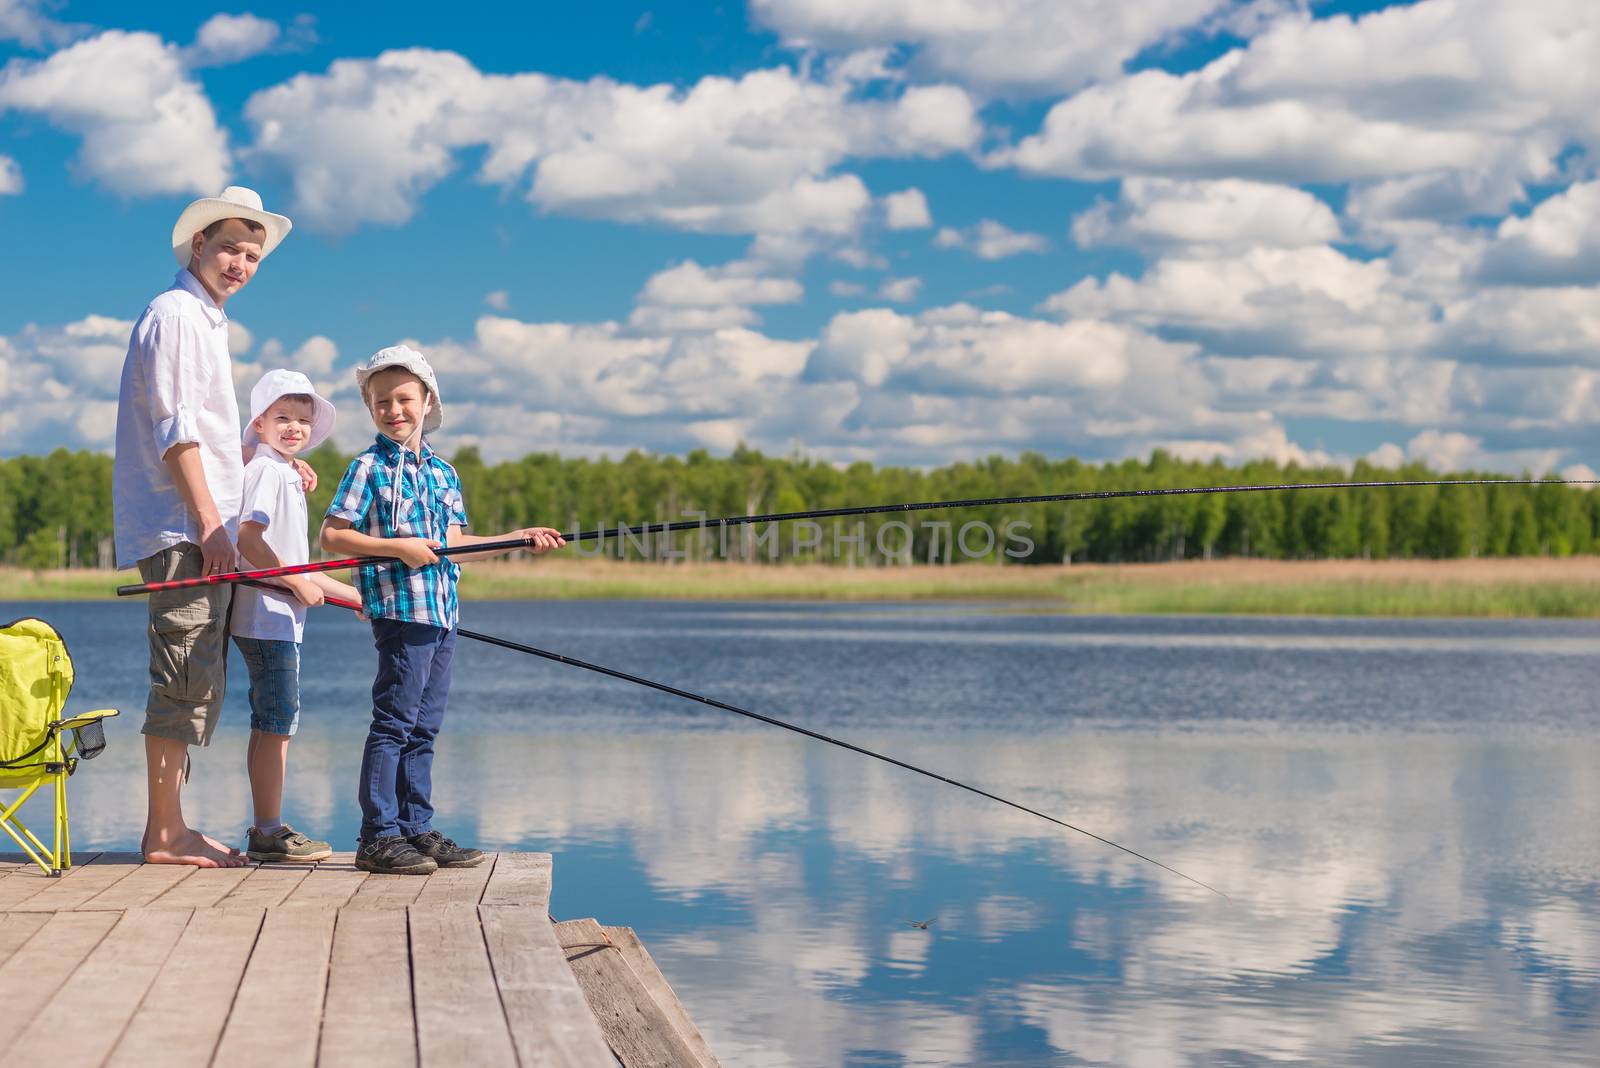 The boys and their father spend a day on a fishing trip on a sunny day